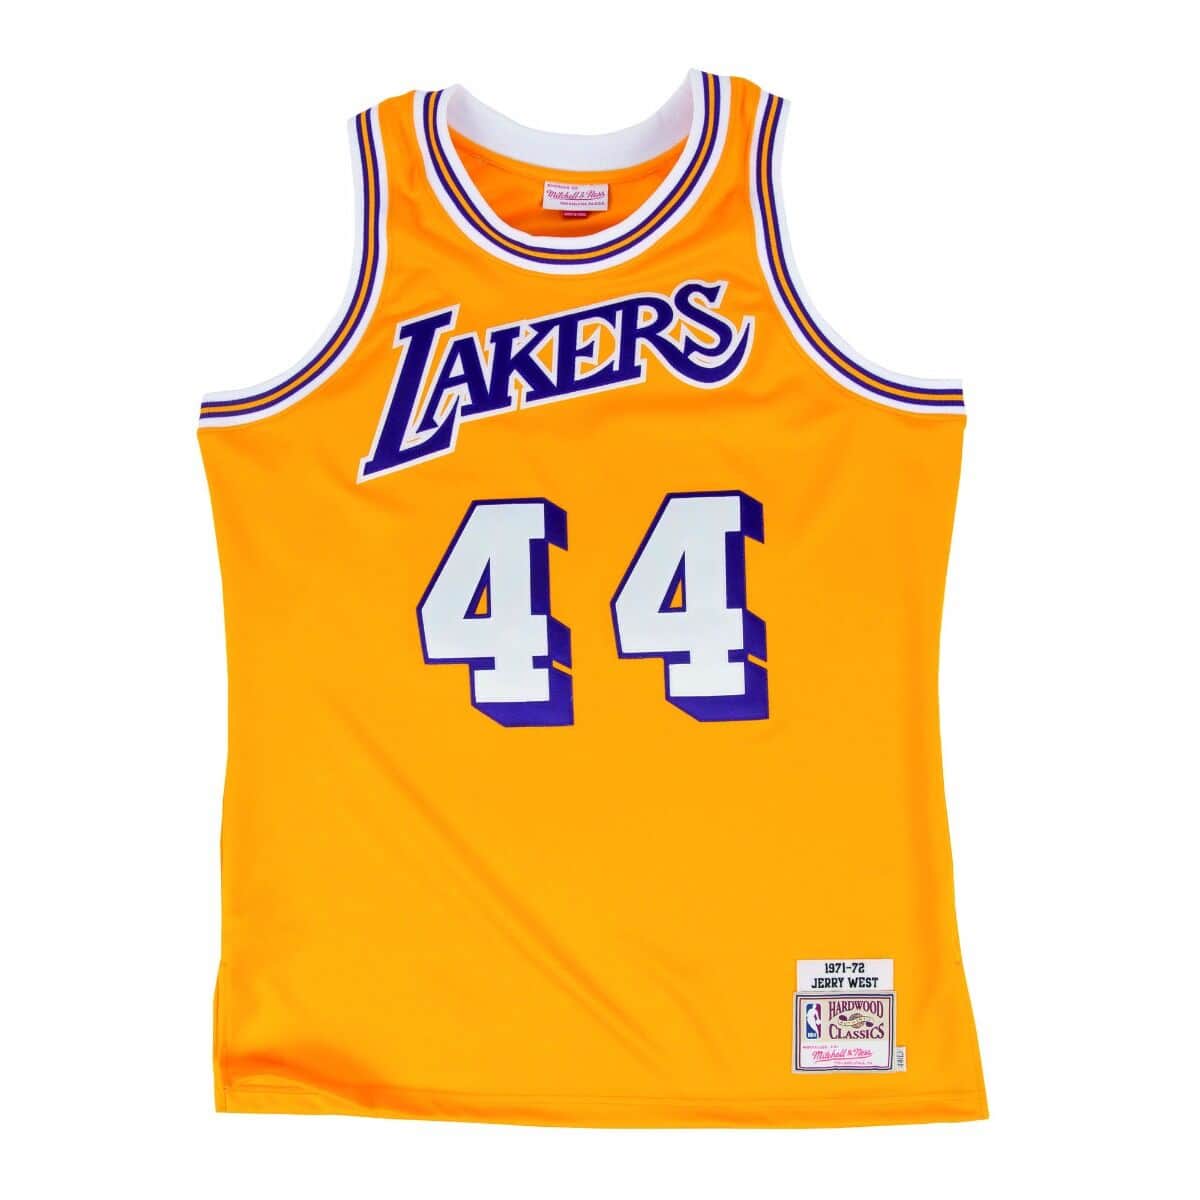 Jerry West 1971 Jersey Los Angeles Lakers